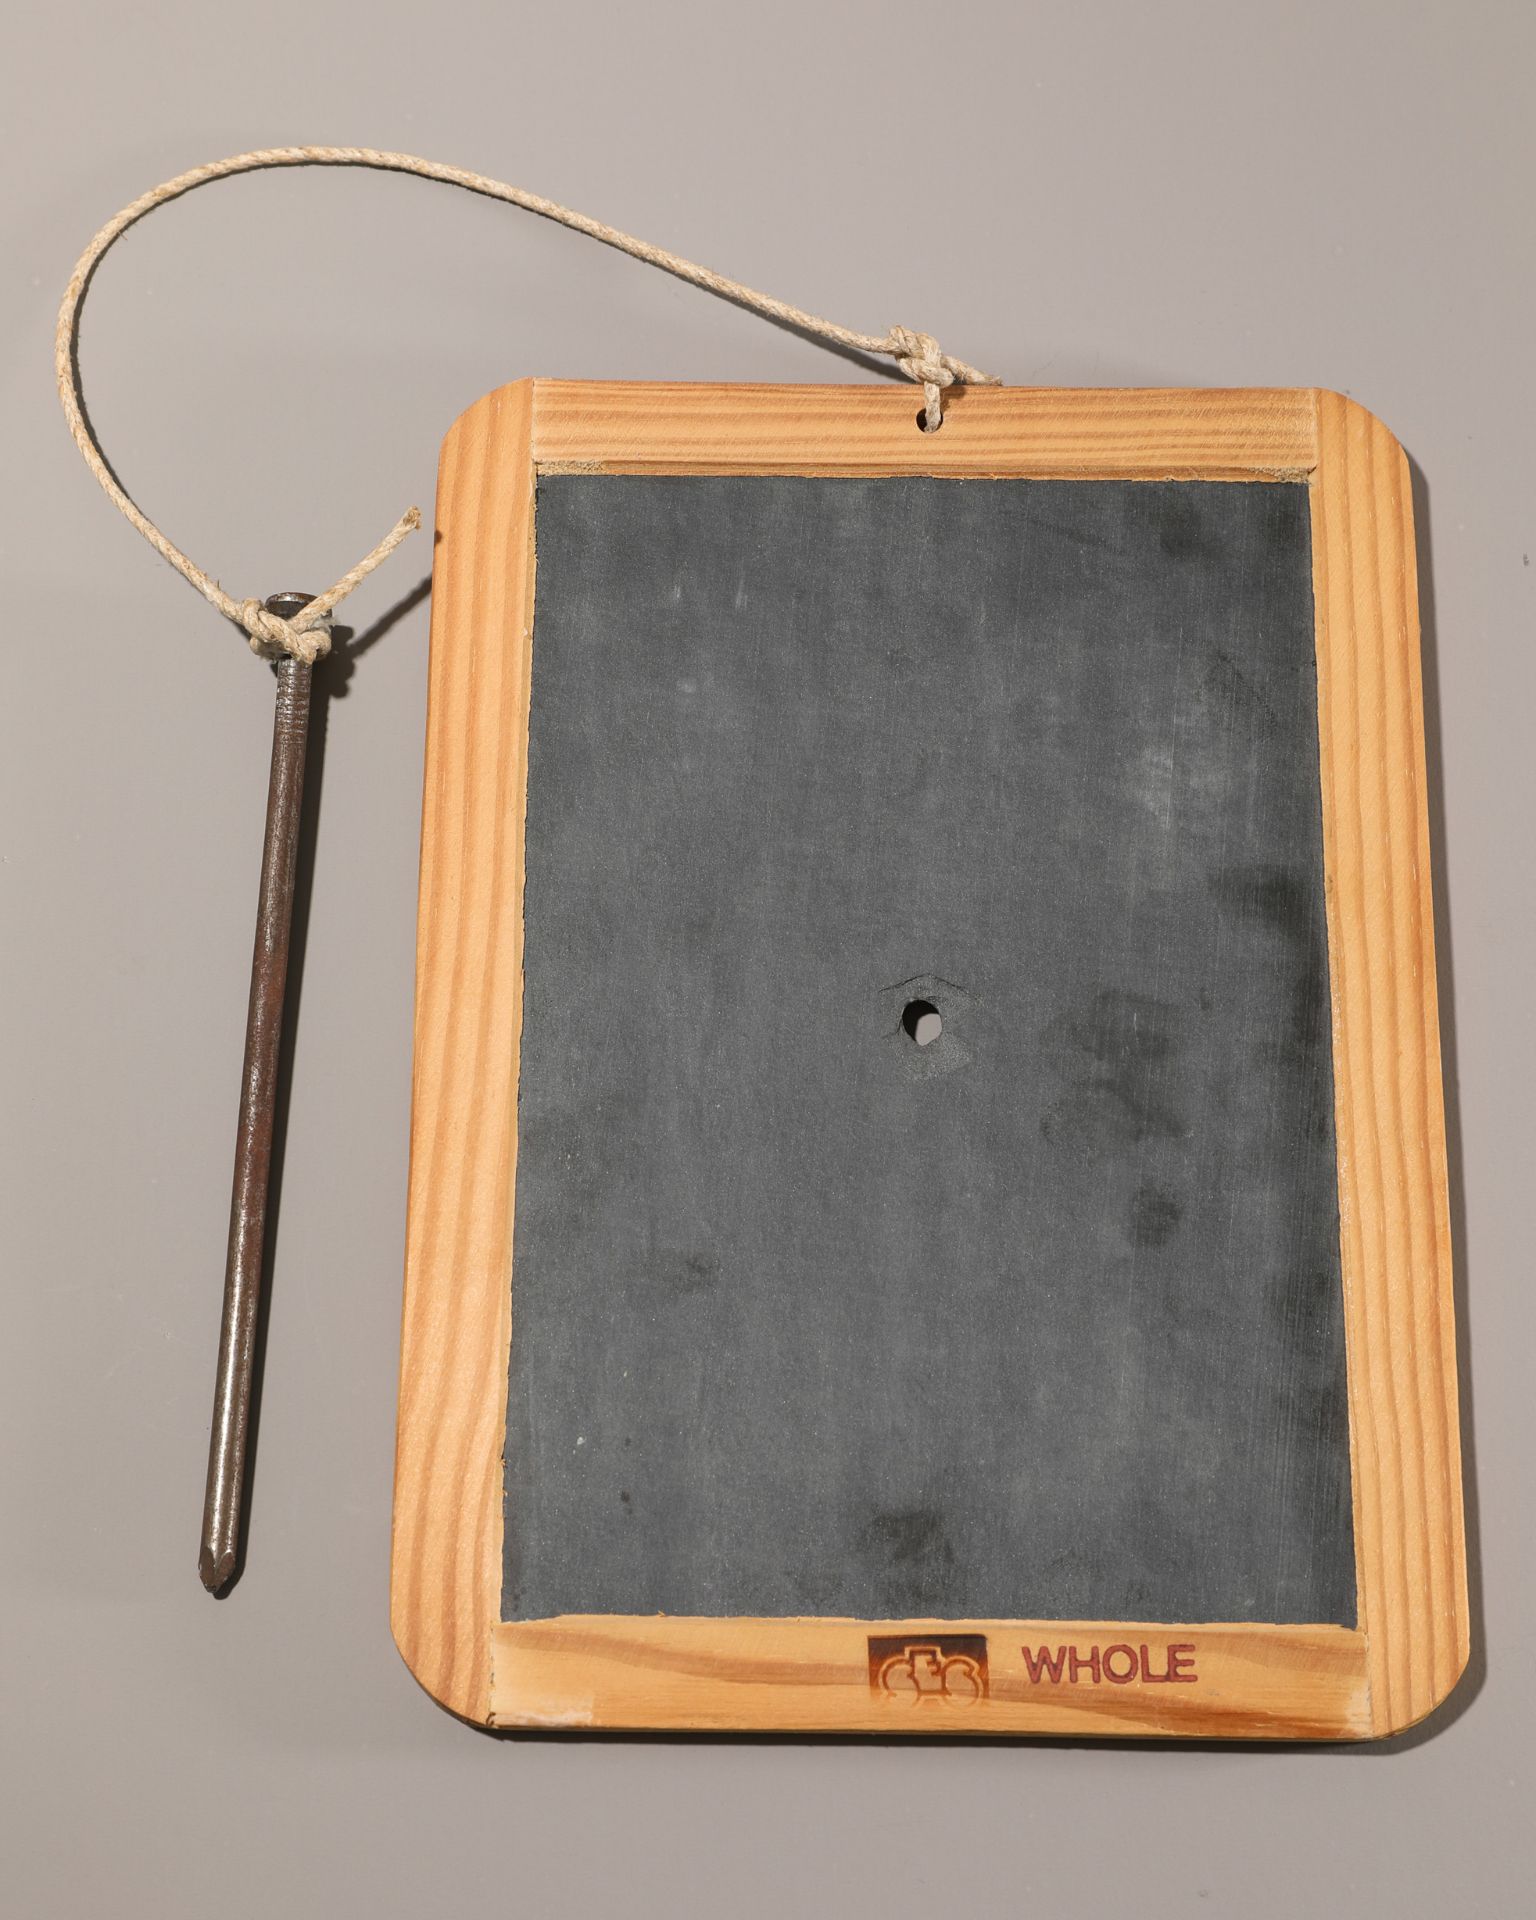 Günther Uecker*, Loch / Hole, 2000, slate, nail, cord, Ex. 22/30 - Image 5 of 6